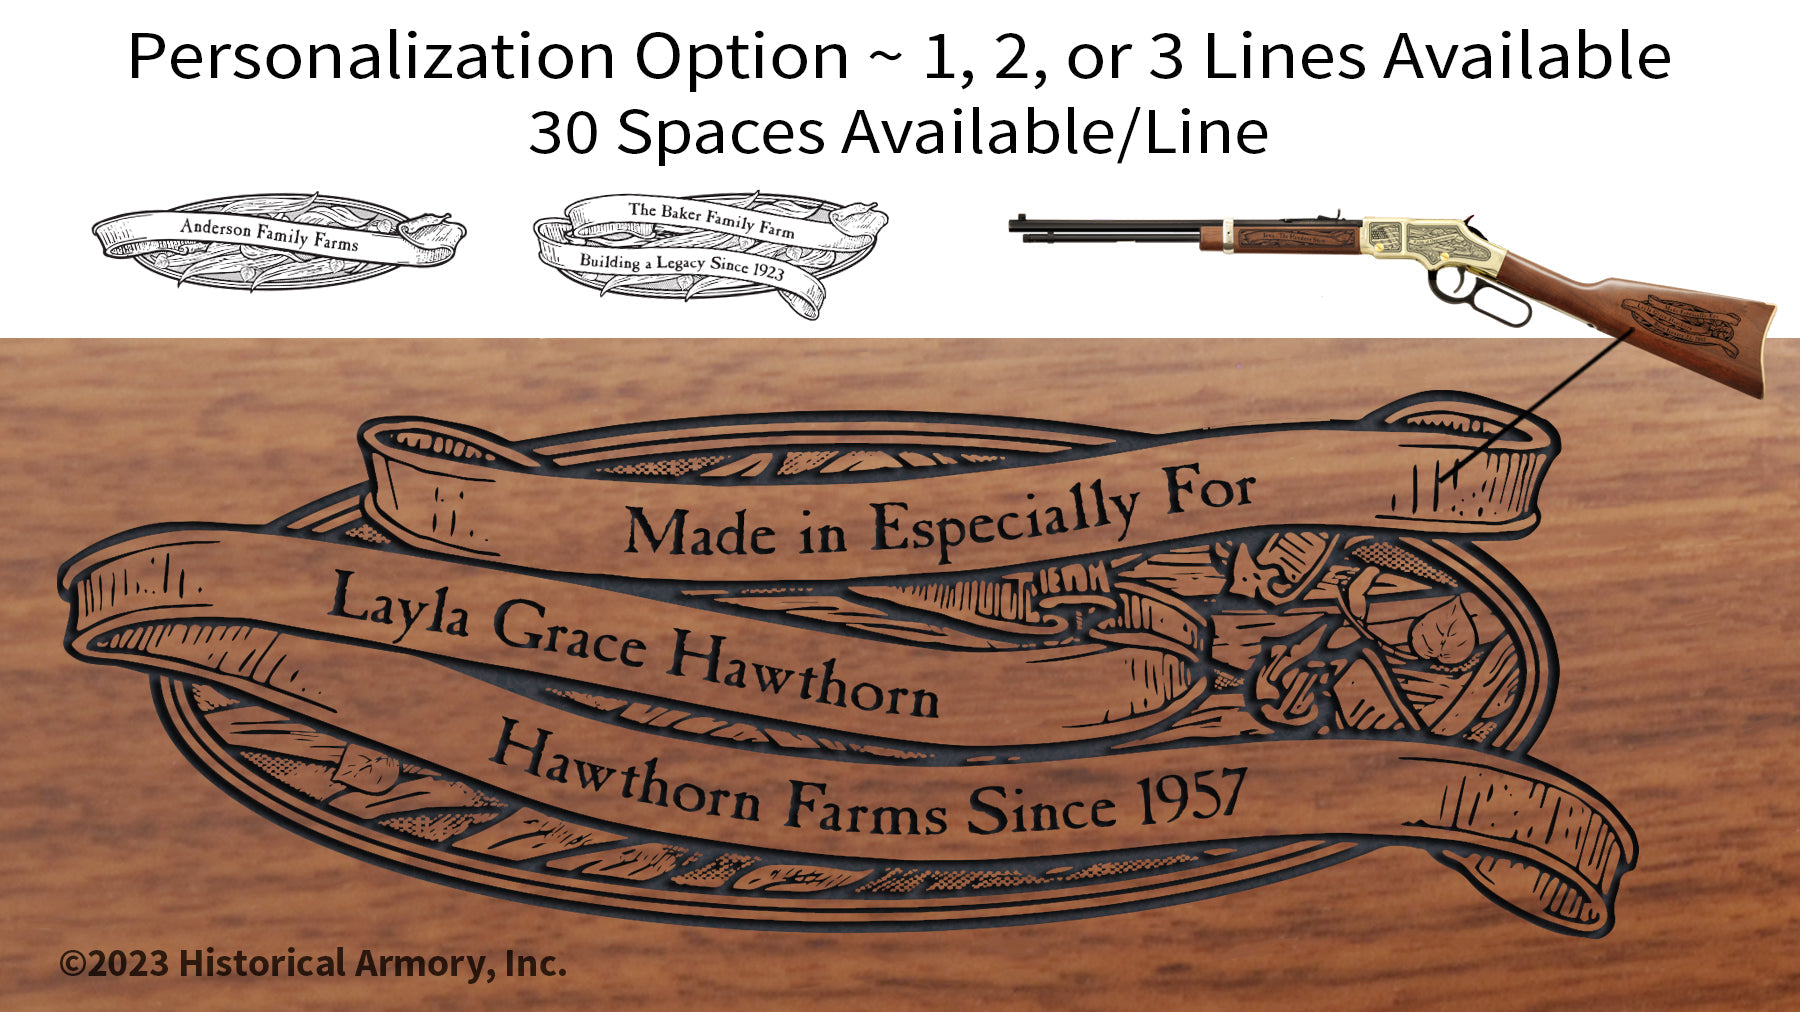 Arizona Agricultural Heritage Engraved Rifle Personalization